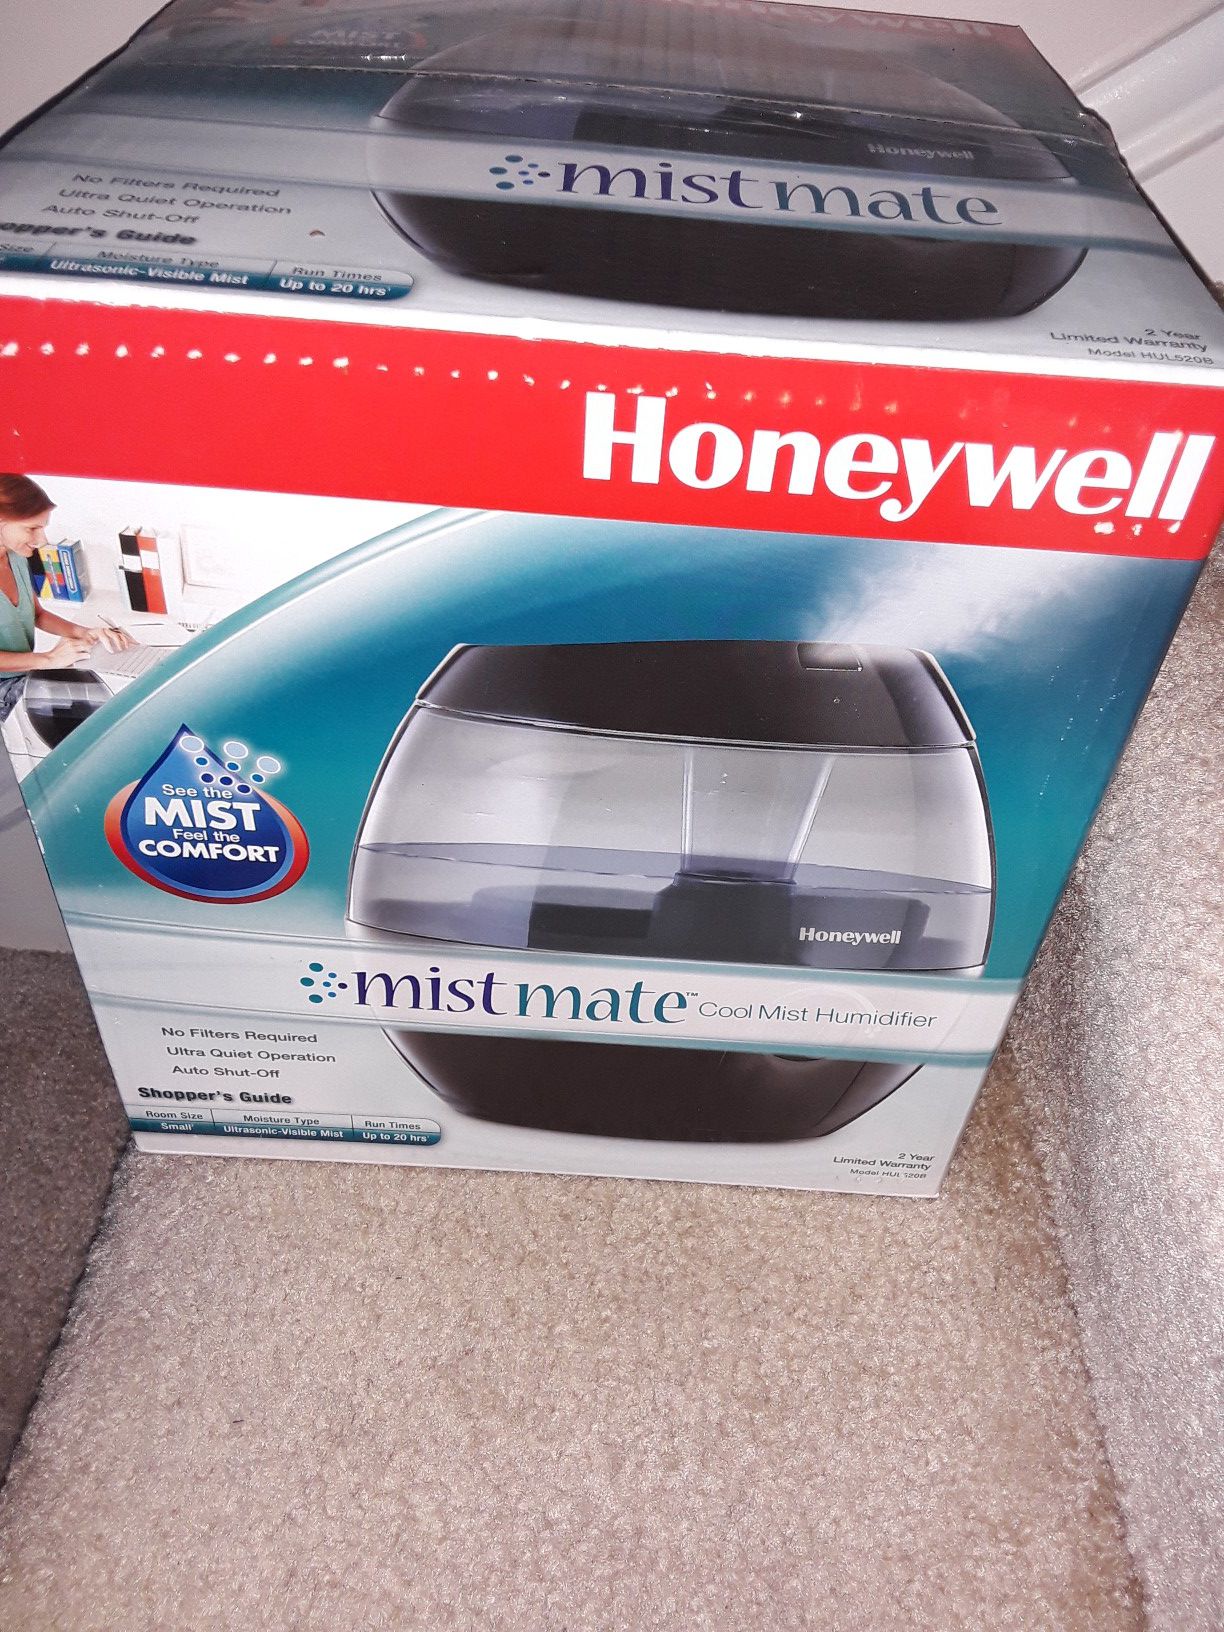 New Humidifier (Never Opened) $5 Offers Only, NO QUESTIONS!